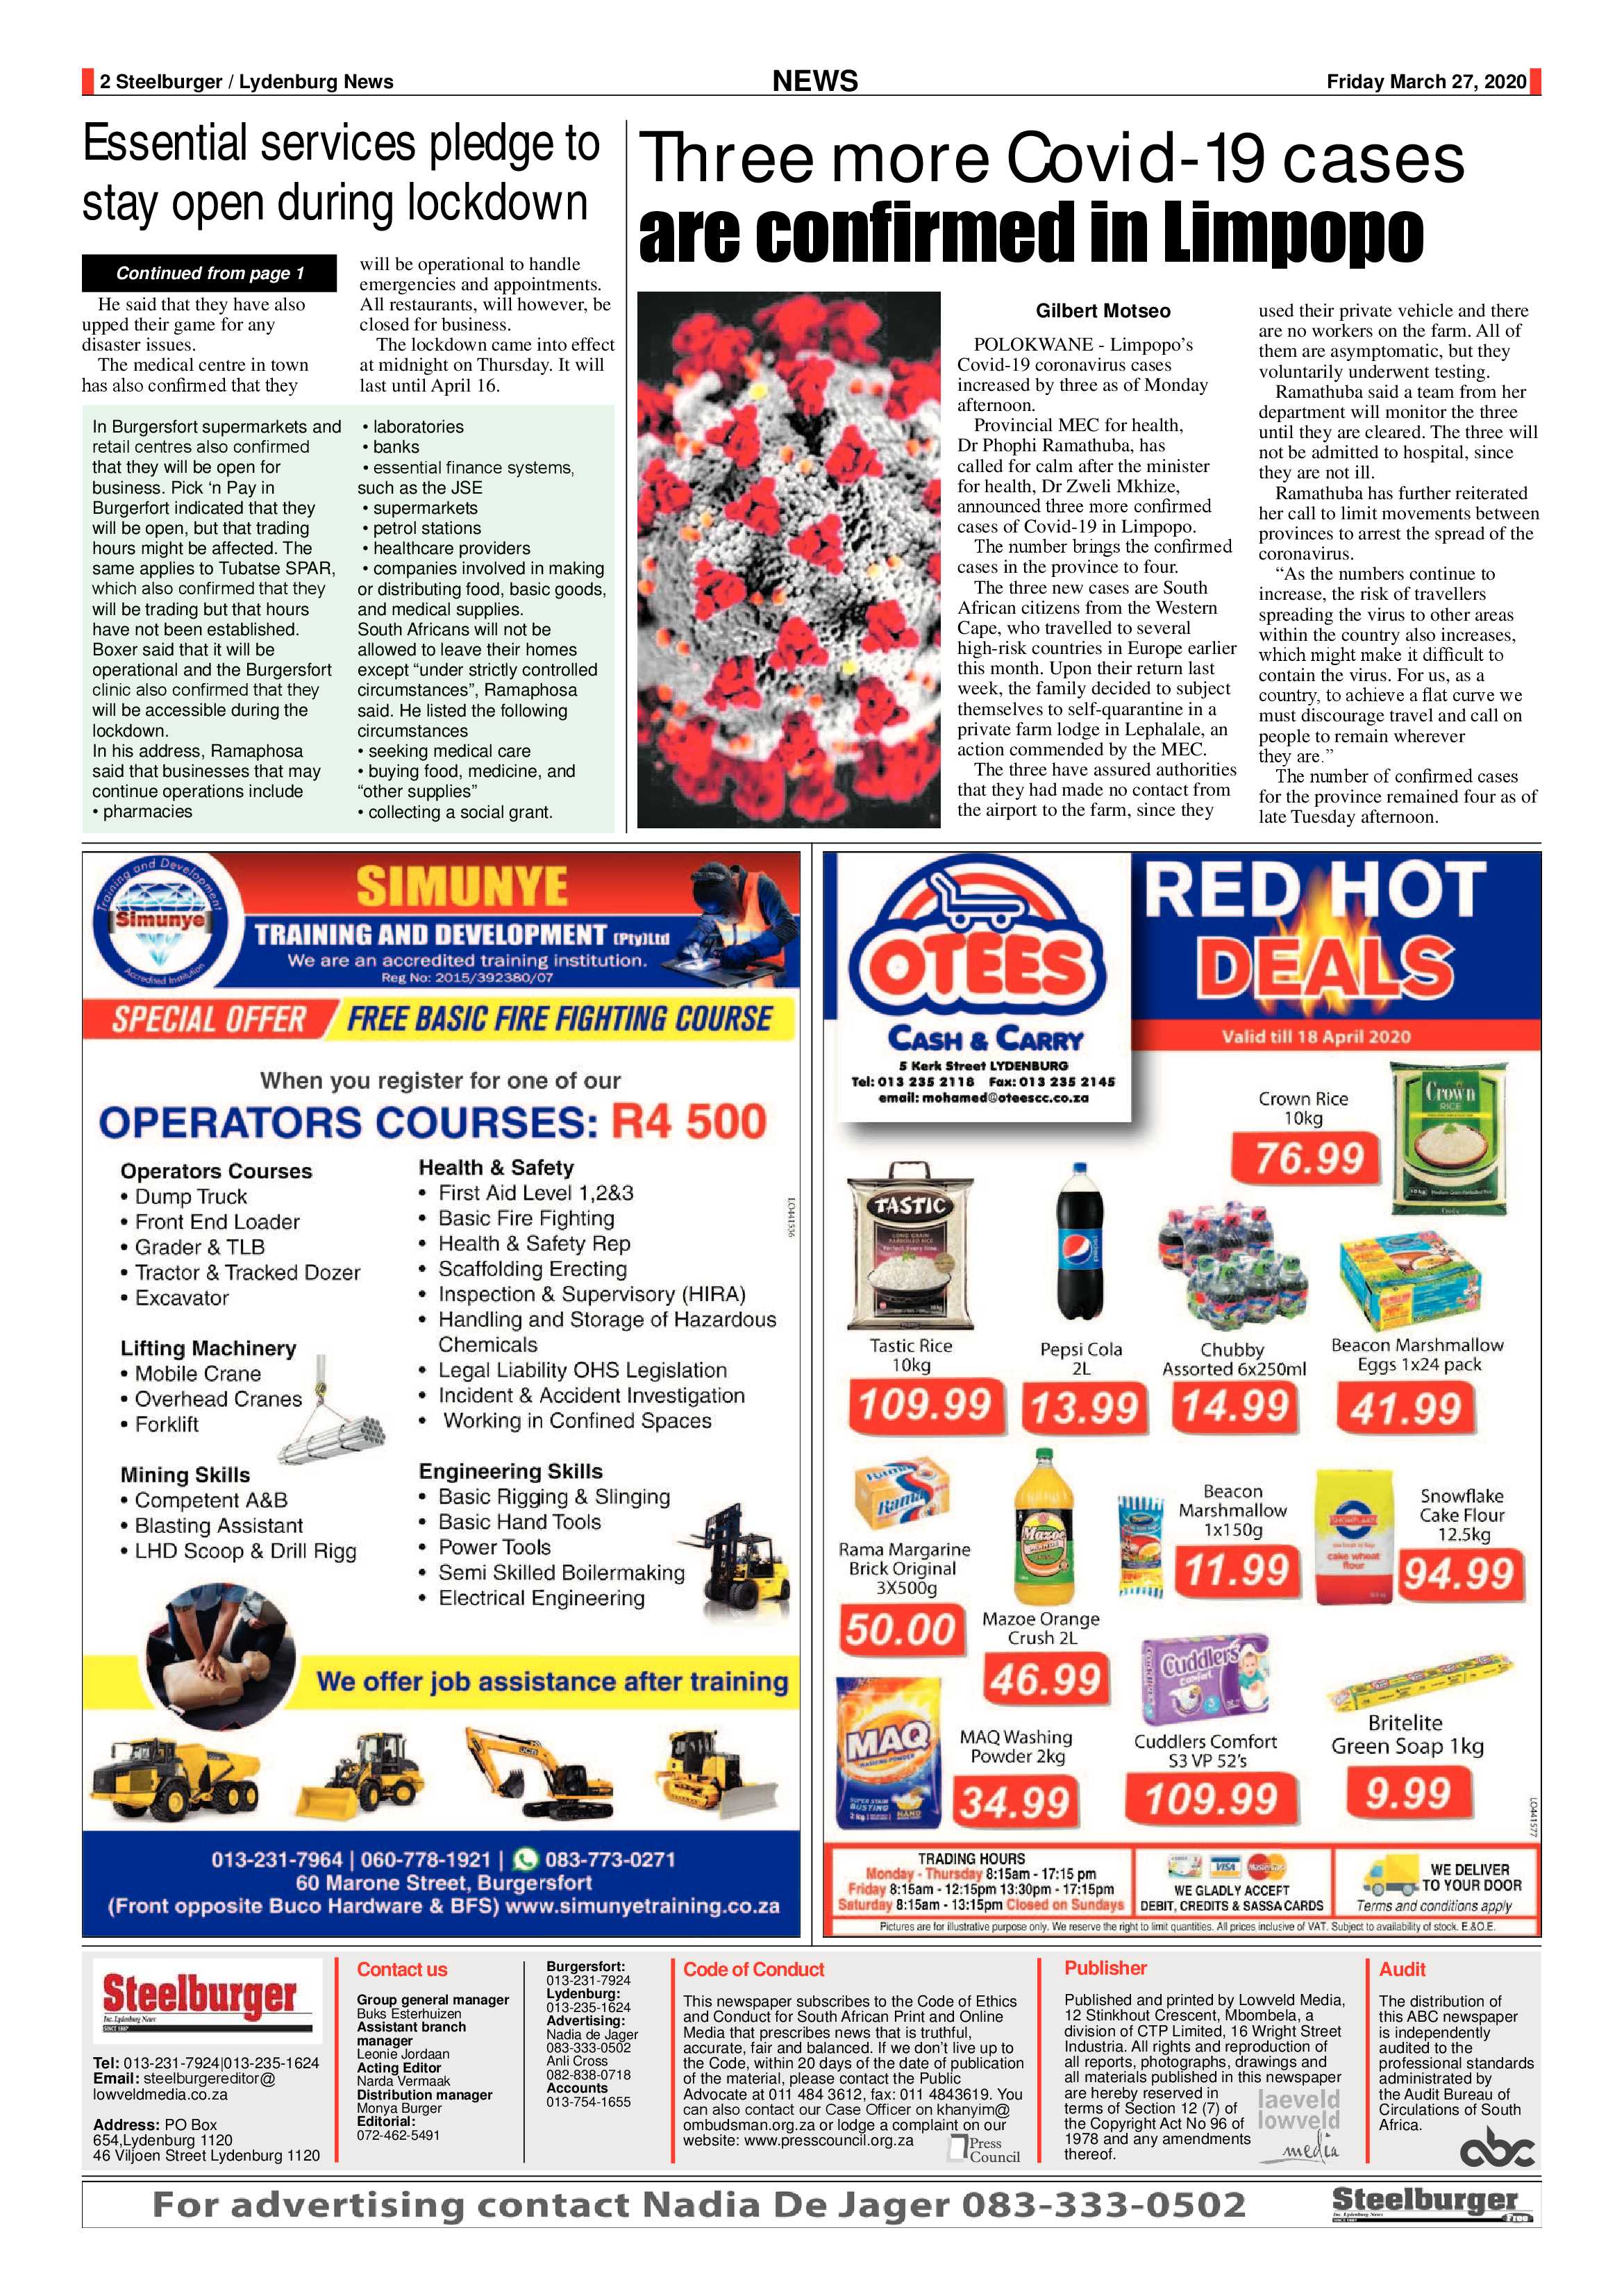 Steelburger 27 March 2020 page 2